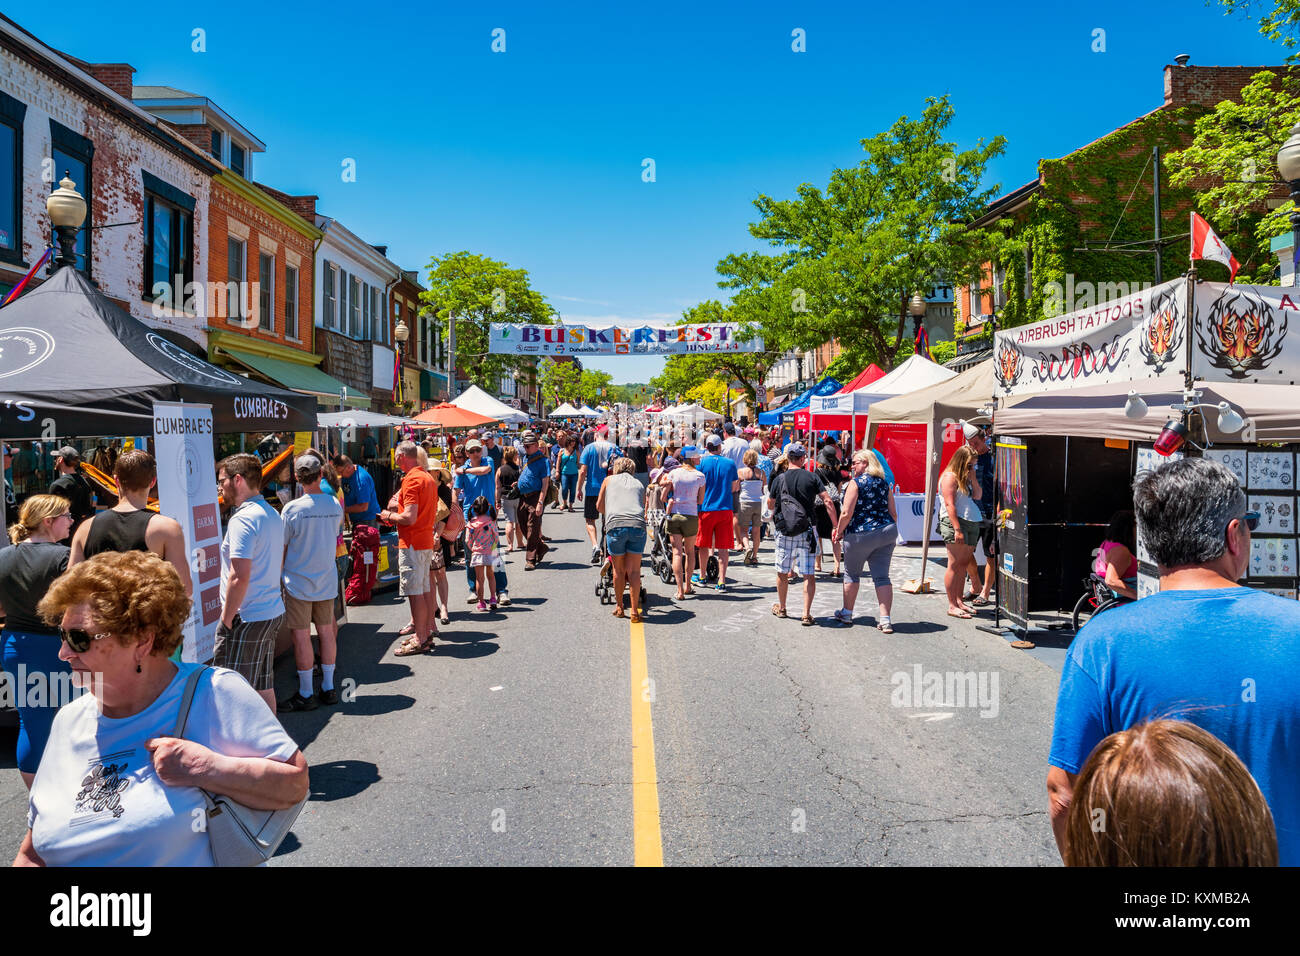 Crowd enjoys a sunny day at the Buskerfest held along King St W in downtown Dundas, Ontario, Canada on a sunny day. Stock Photo